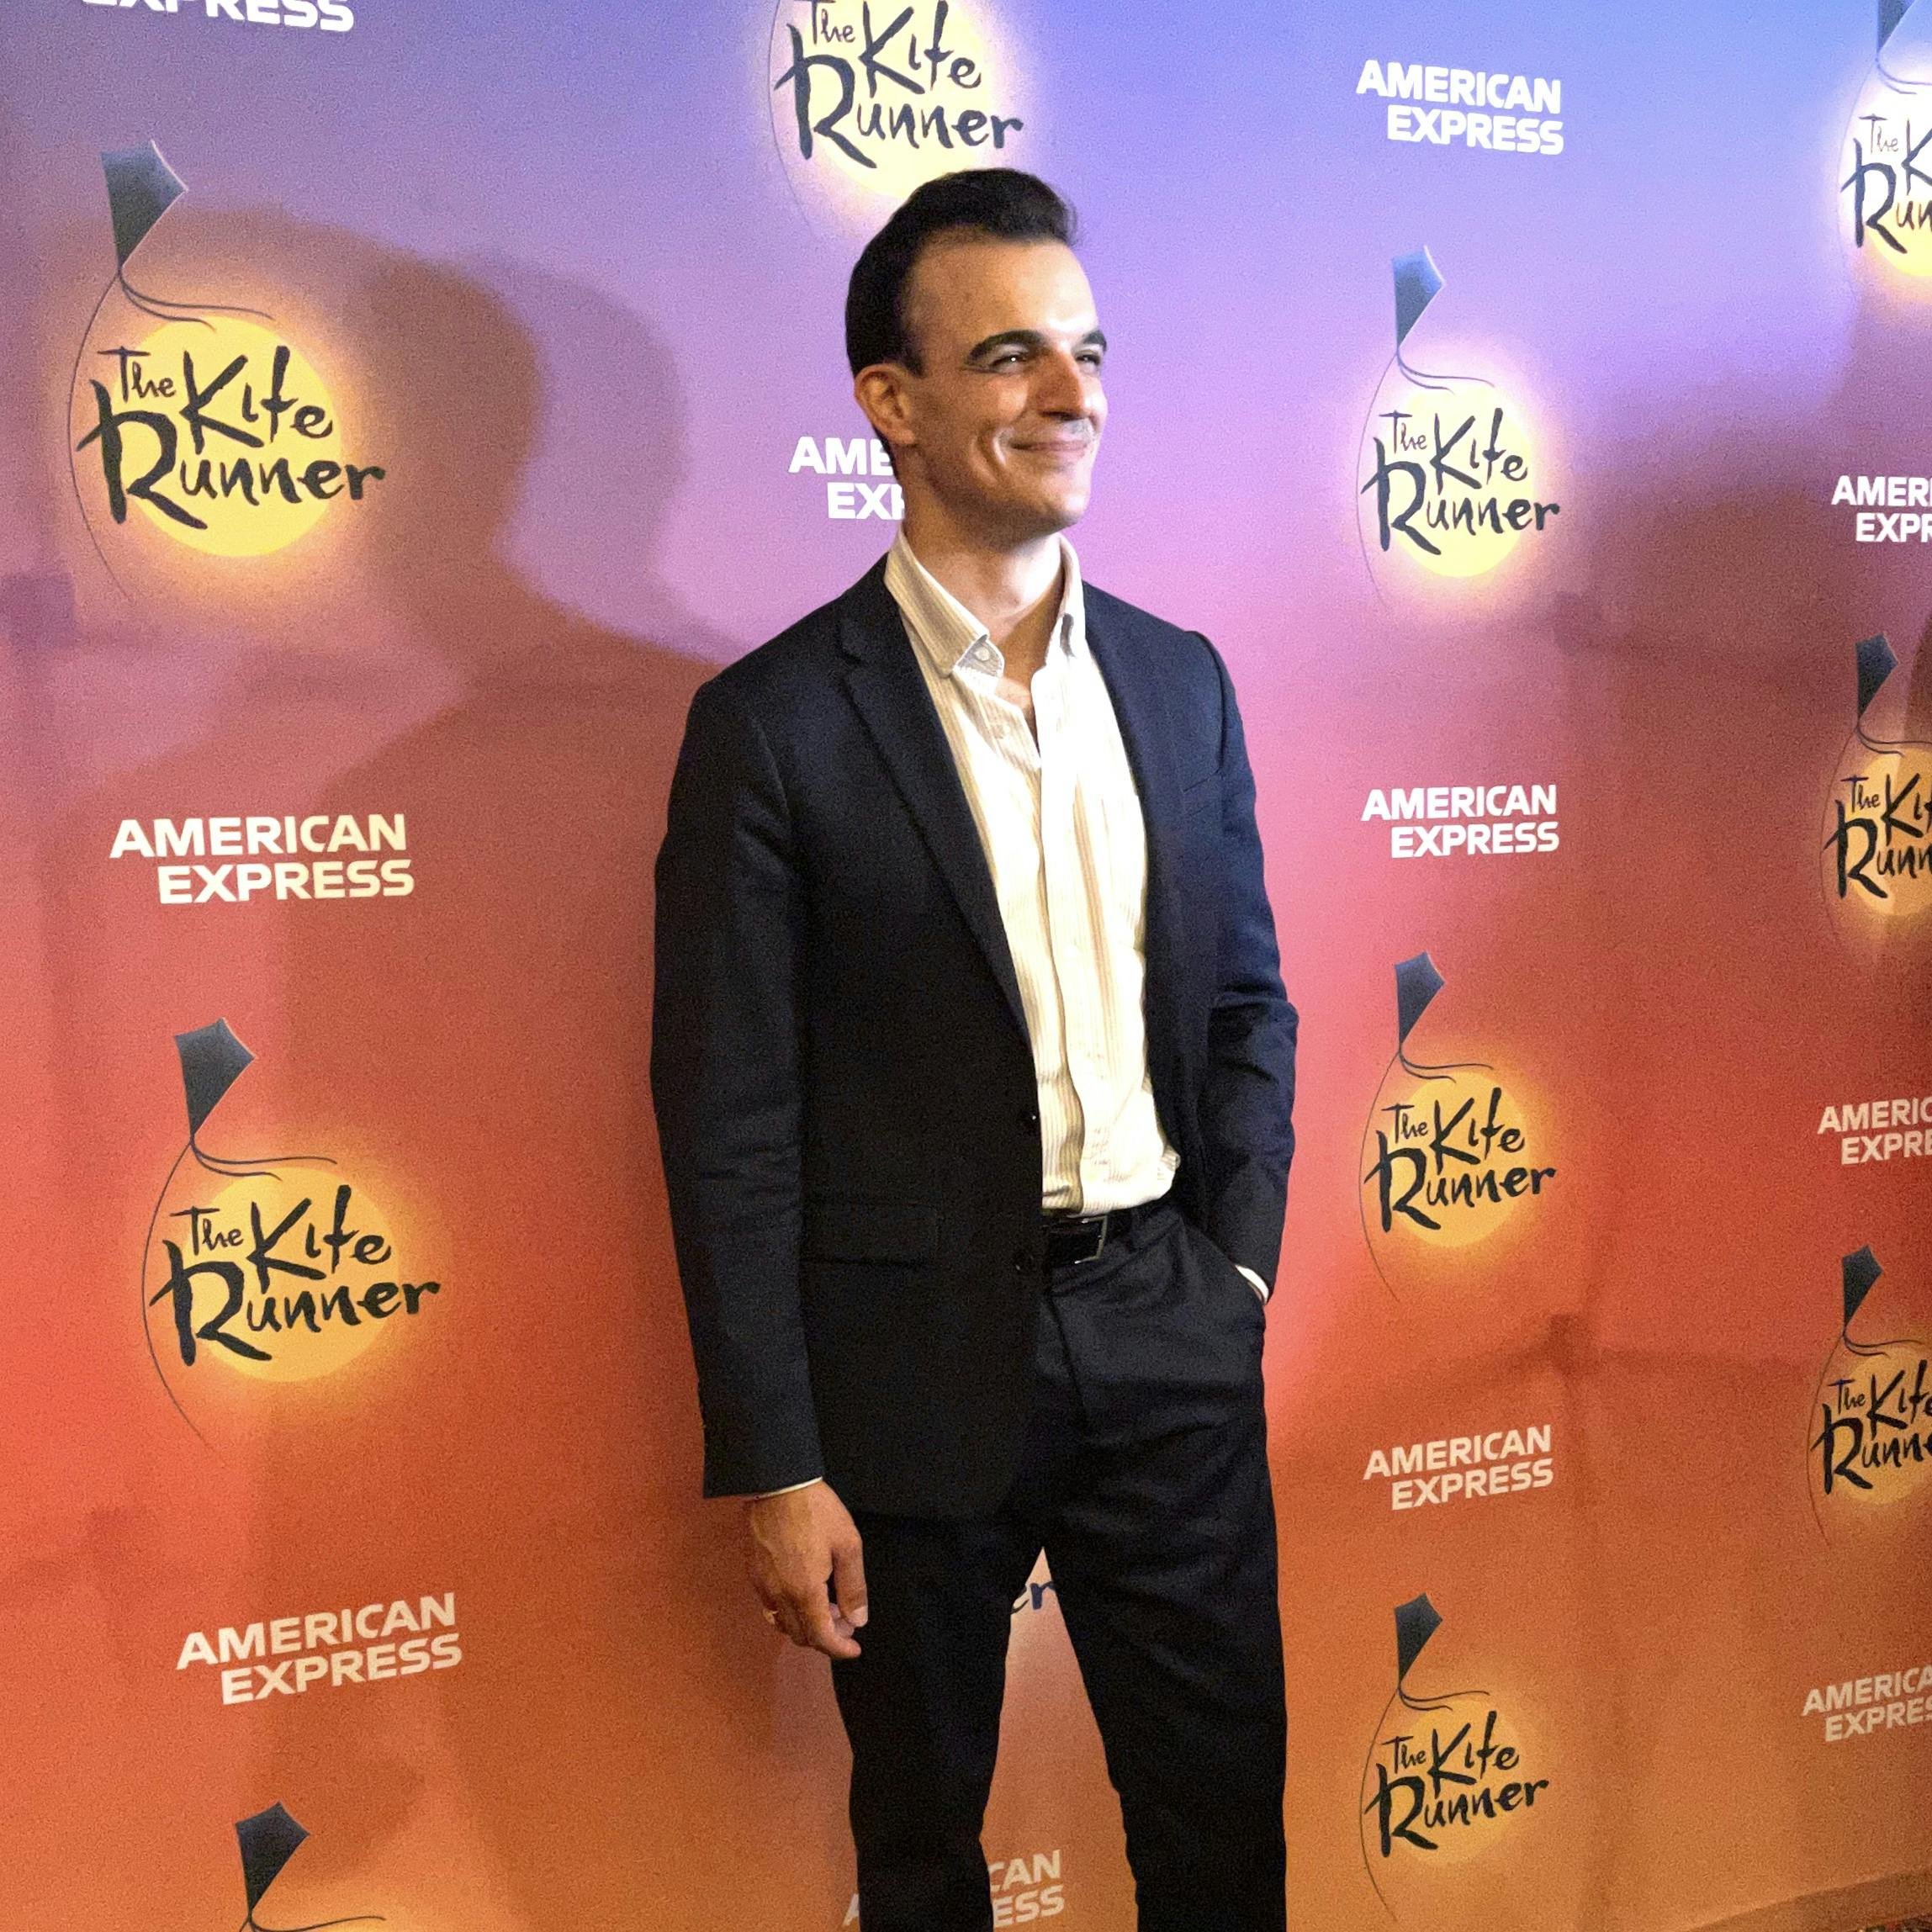 The Kite Runner Broadway Opening Night - Alex Purcell